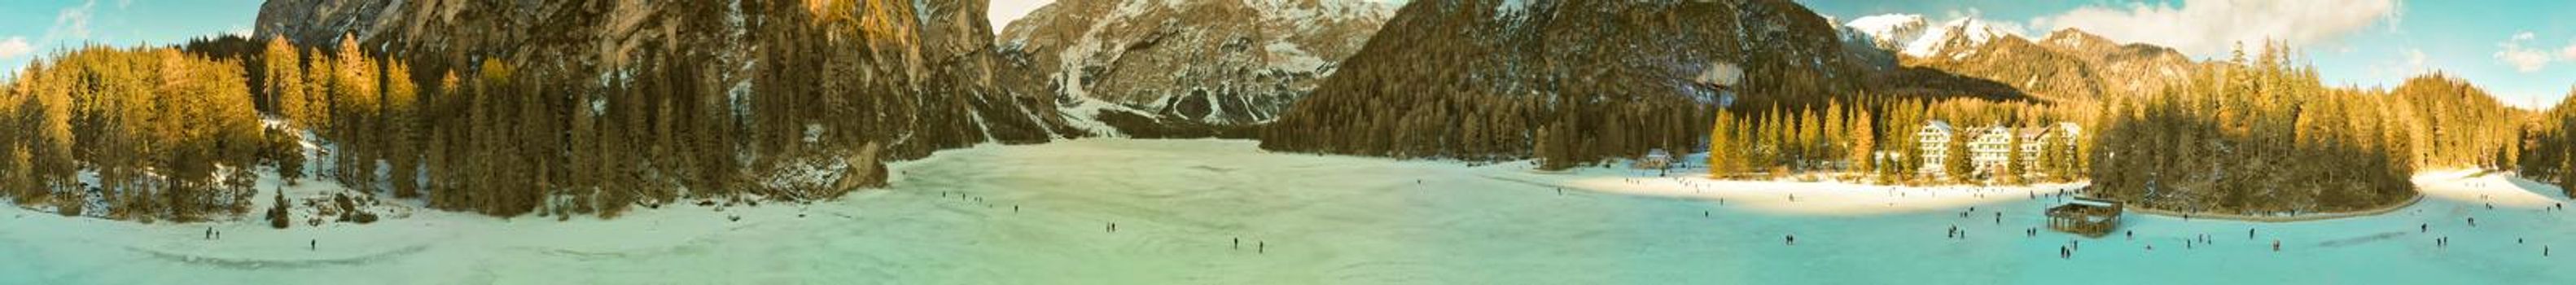 Braies Lake blotted in winter, aerial view from drone, Italian Alps.